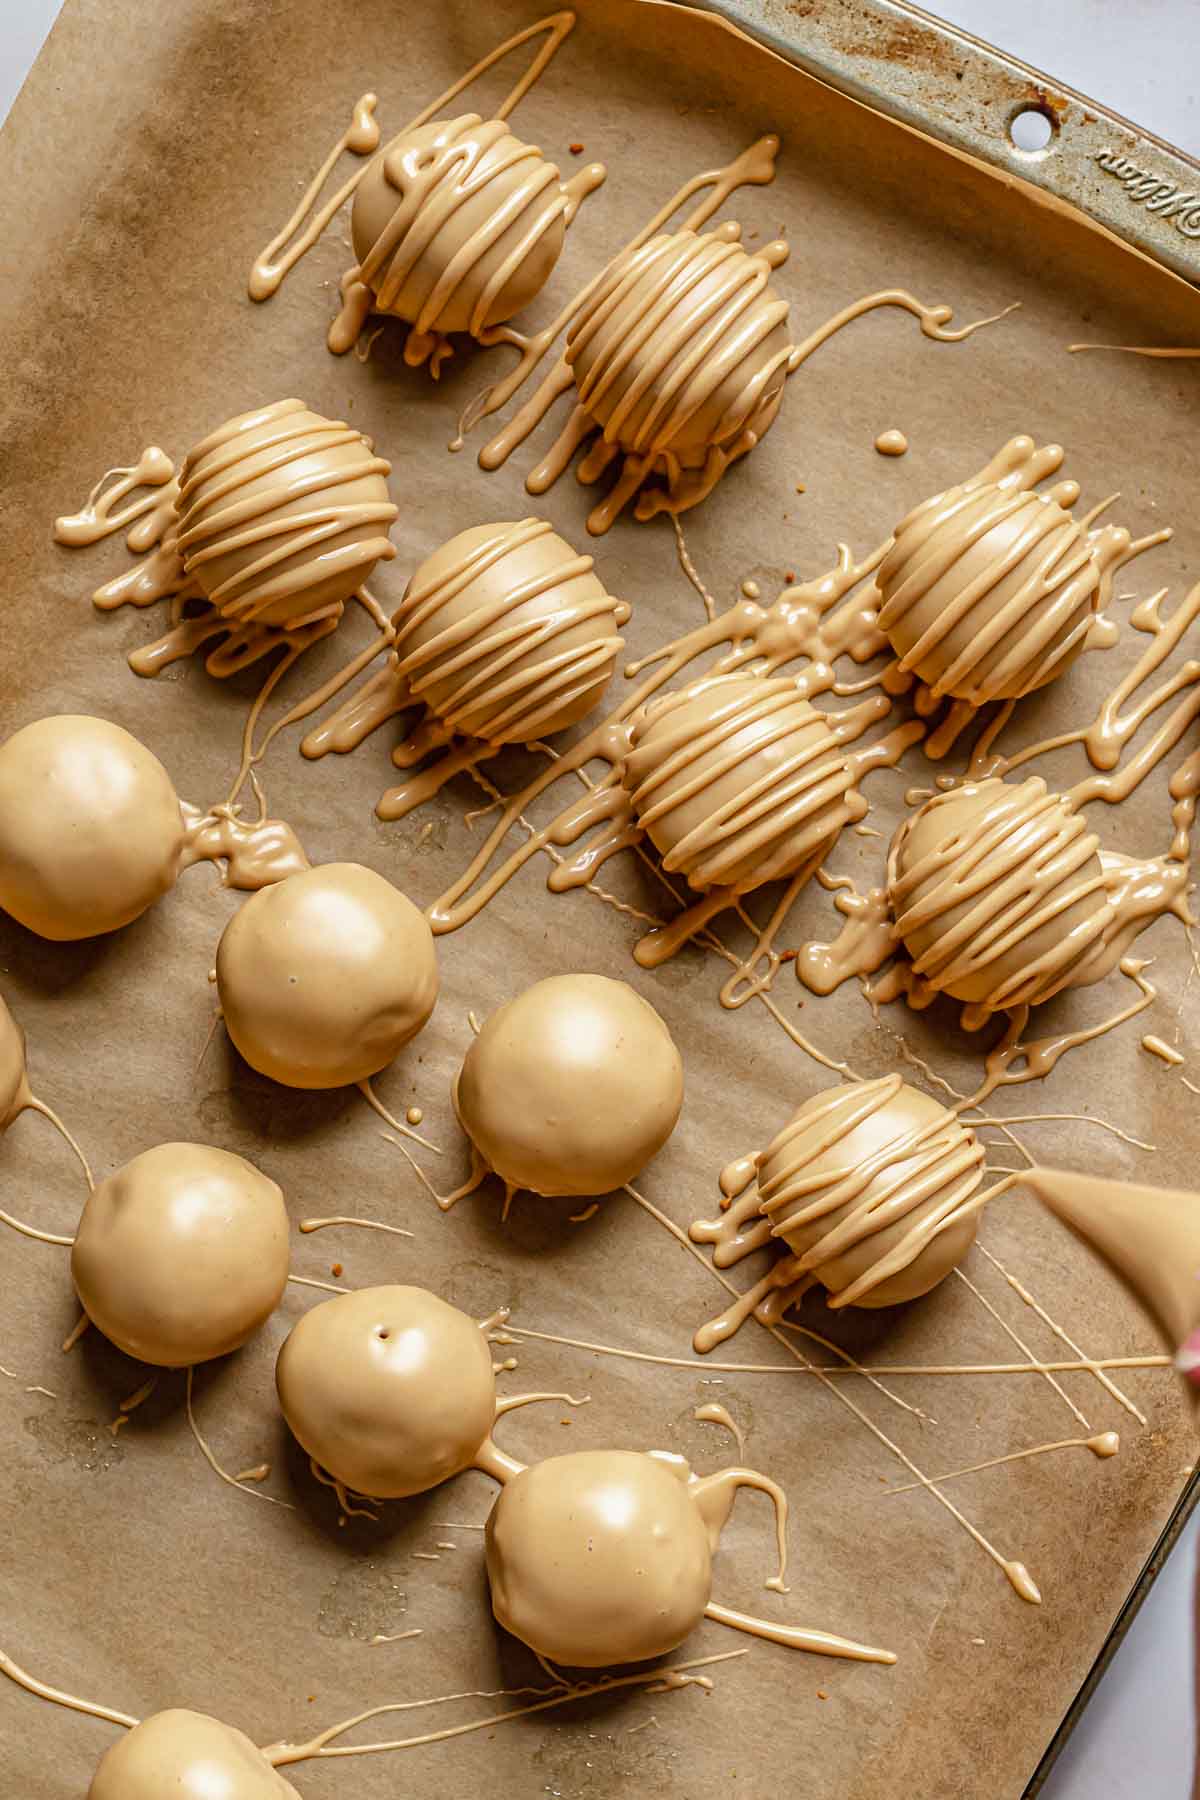 A piping bag making drizzles on top of the truffles.